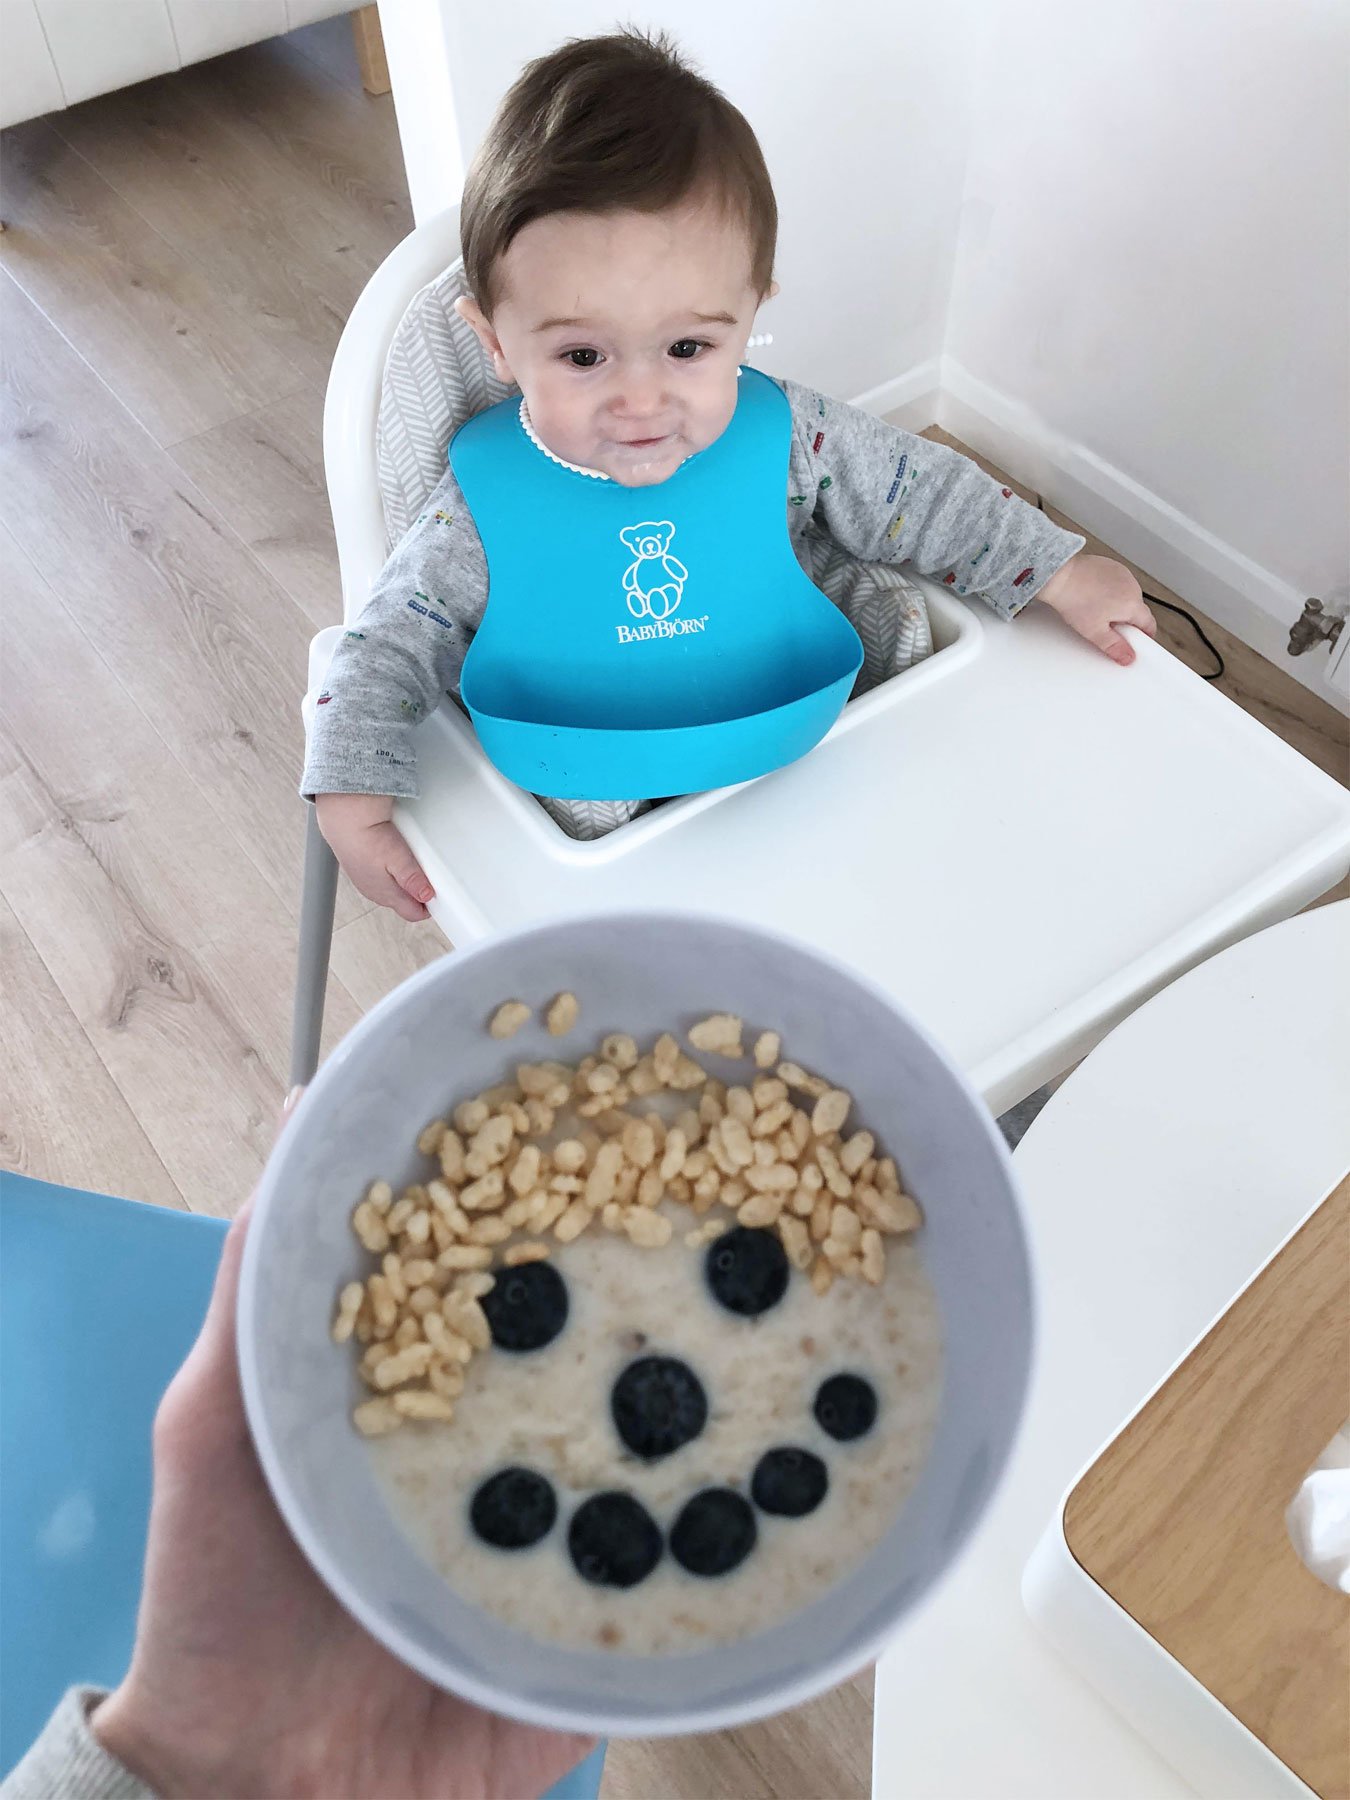 breakfast ideas for a 9-month-old baby: porridge and blueberries